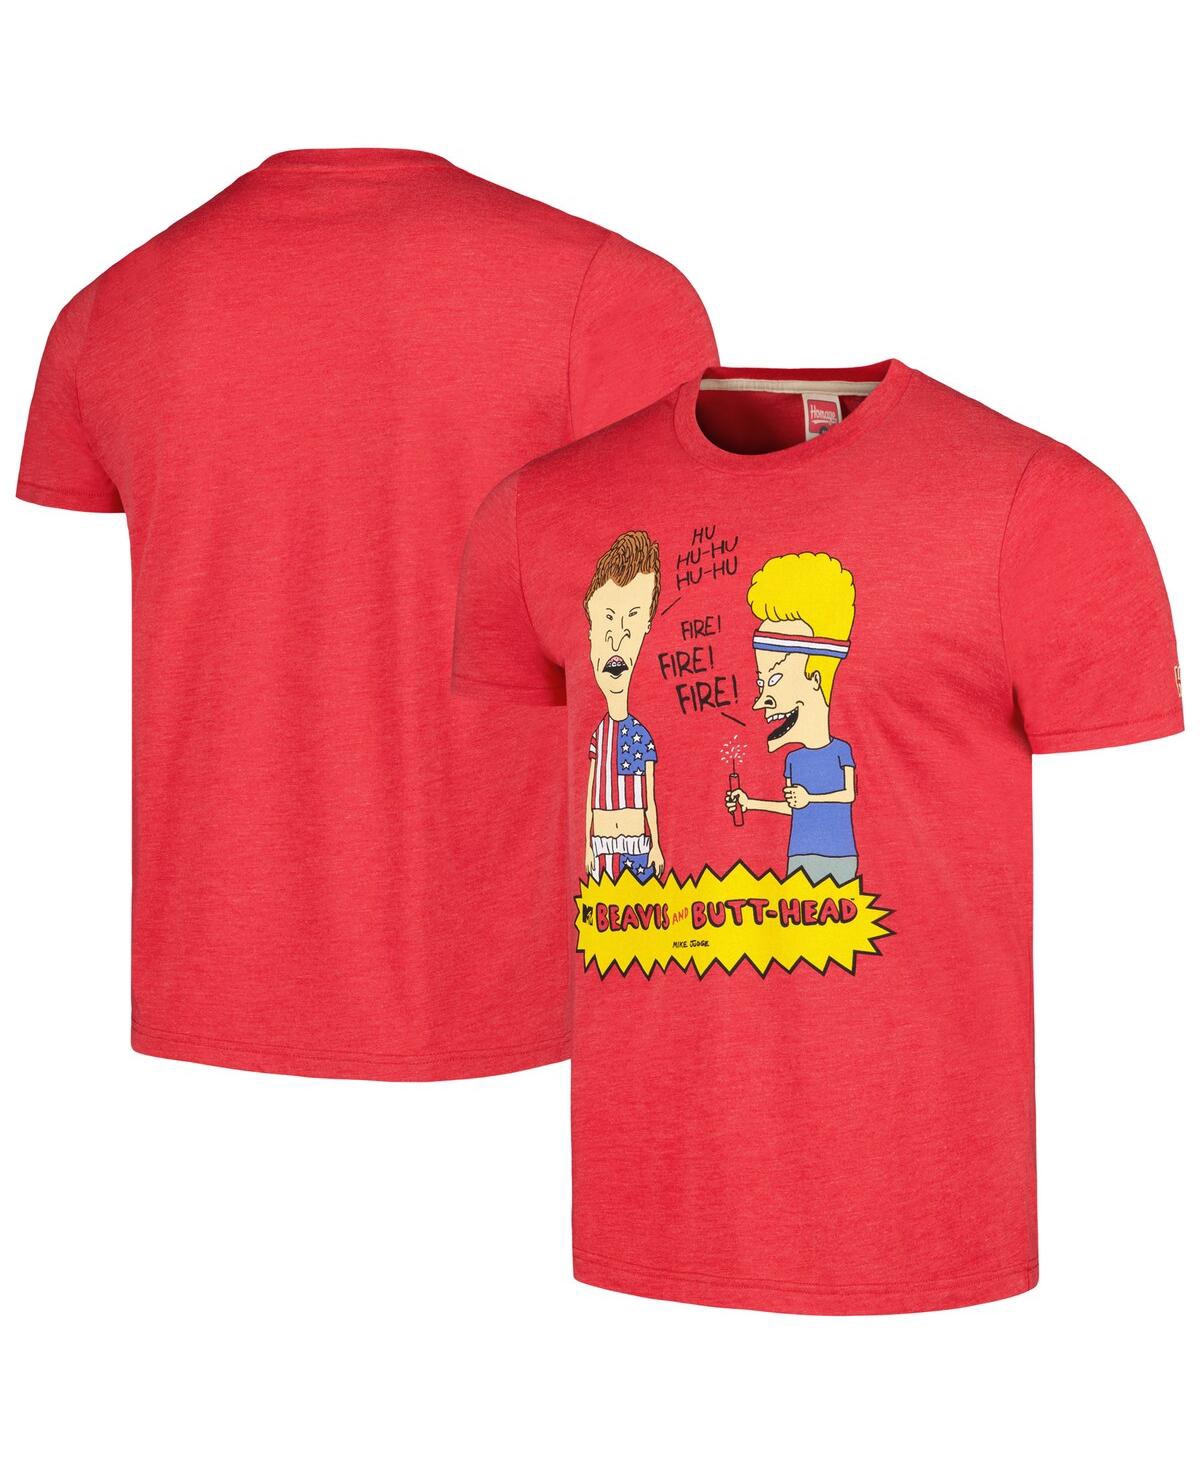 Men's and Women's Homage Red Beavis and Butt-Head Tri-Blend T-shirt - Red